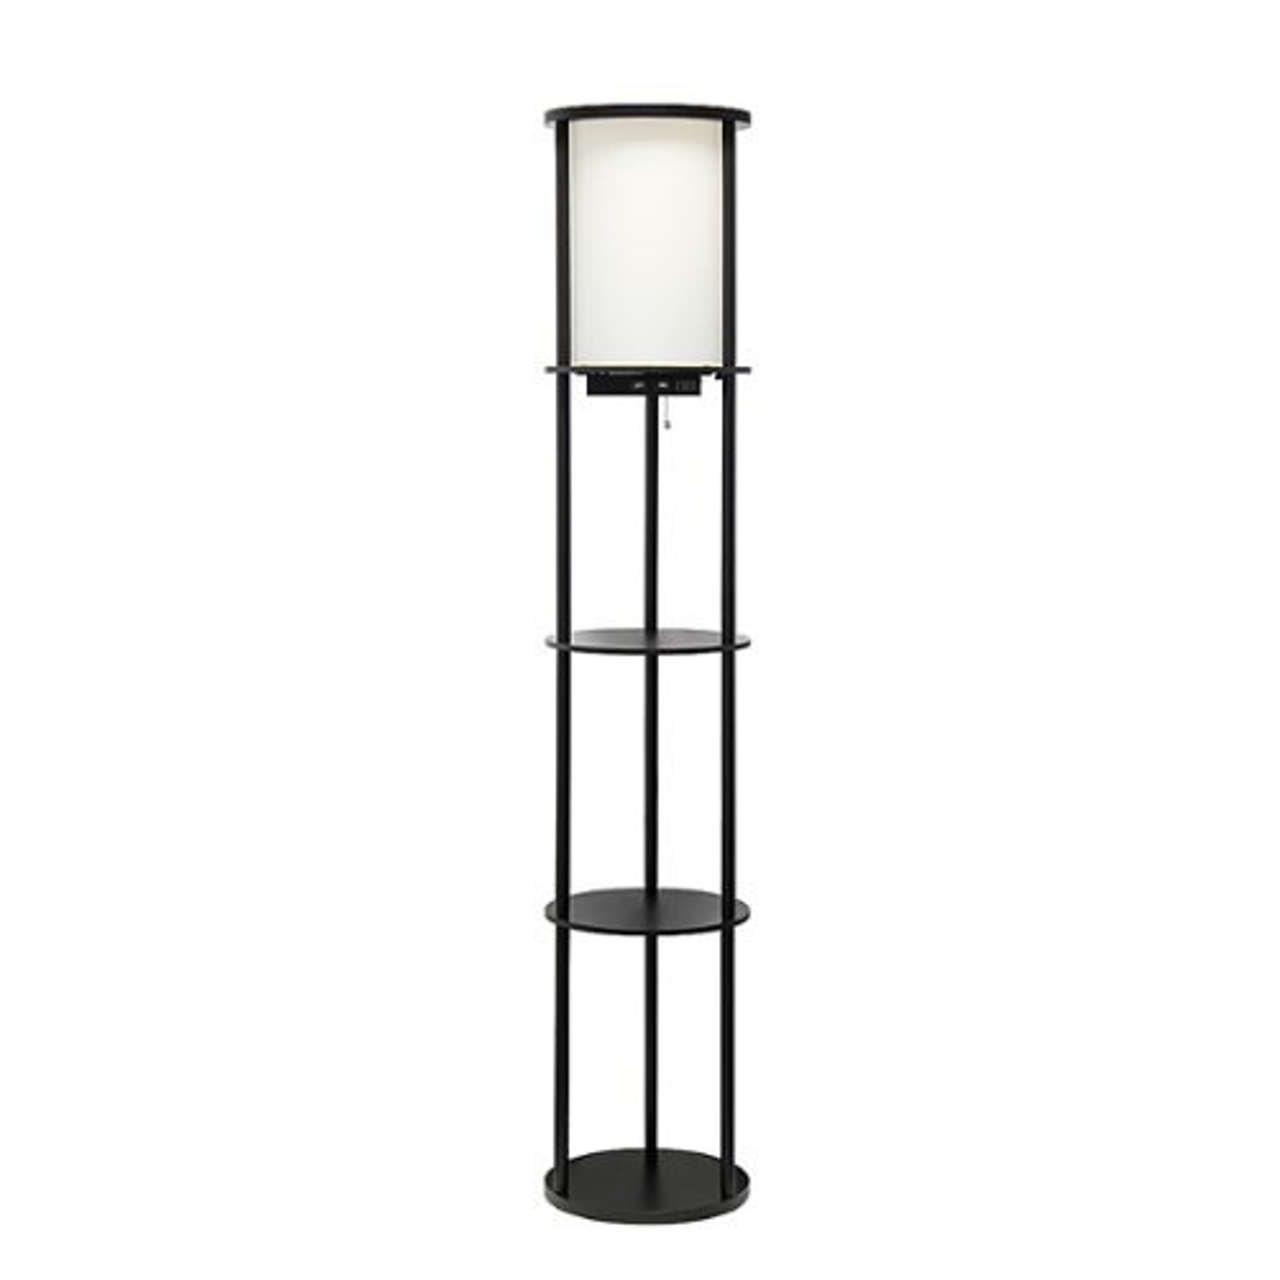 Simple Designs Round Etagere Storage Floor Lamp with 2 USB, 1 Outlet - Black